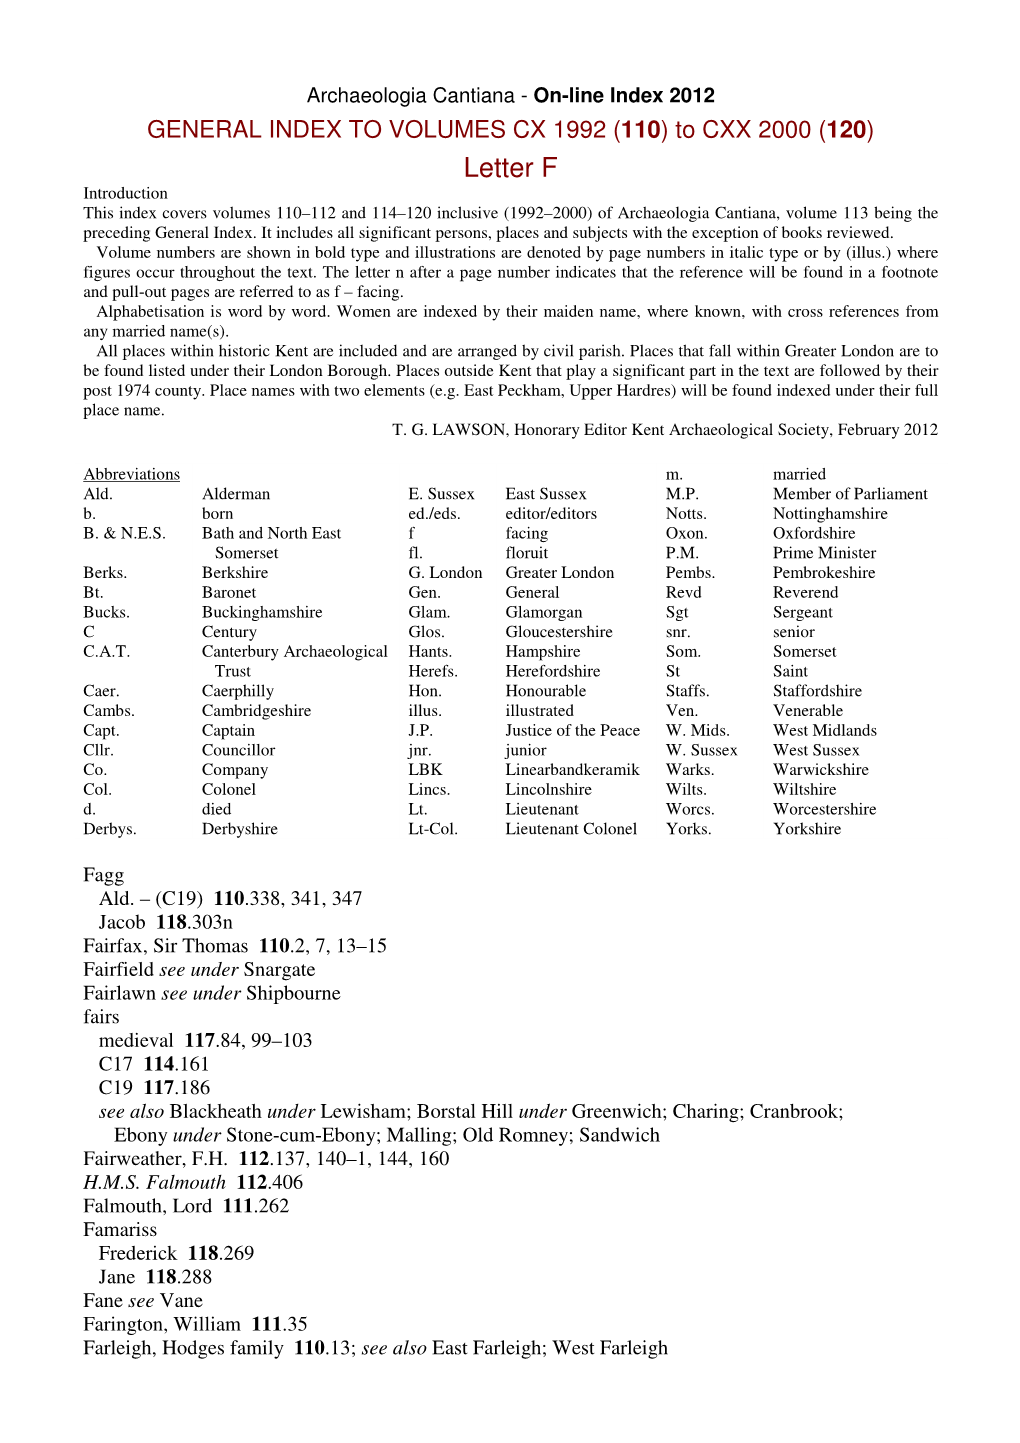 Letter F Introduction This Index Covers Volumes 110–112 and 114–120 Inclusive (1992–2000) of Archaeologia Cantiana, Volume 113 Being the Preceding General Index